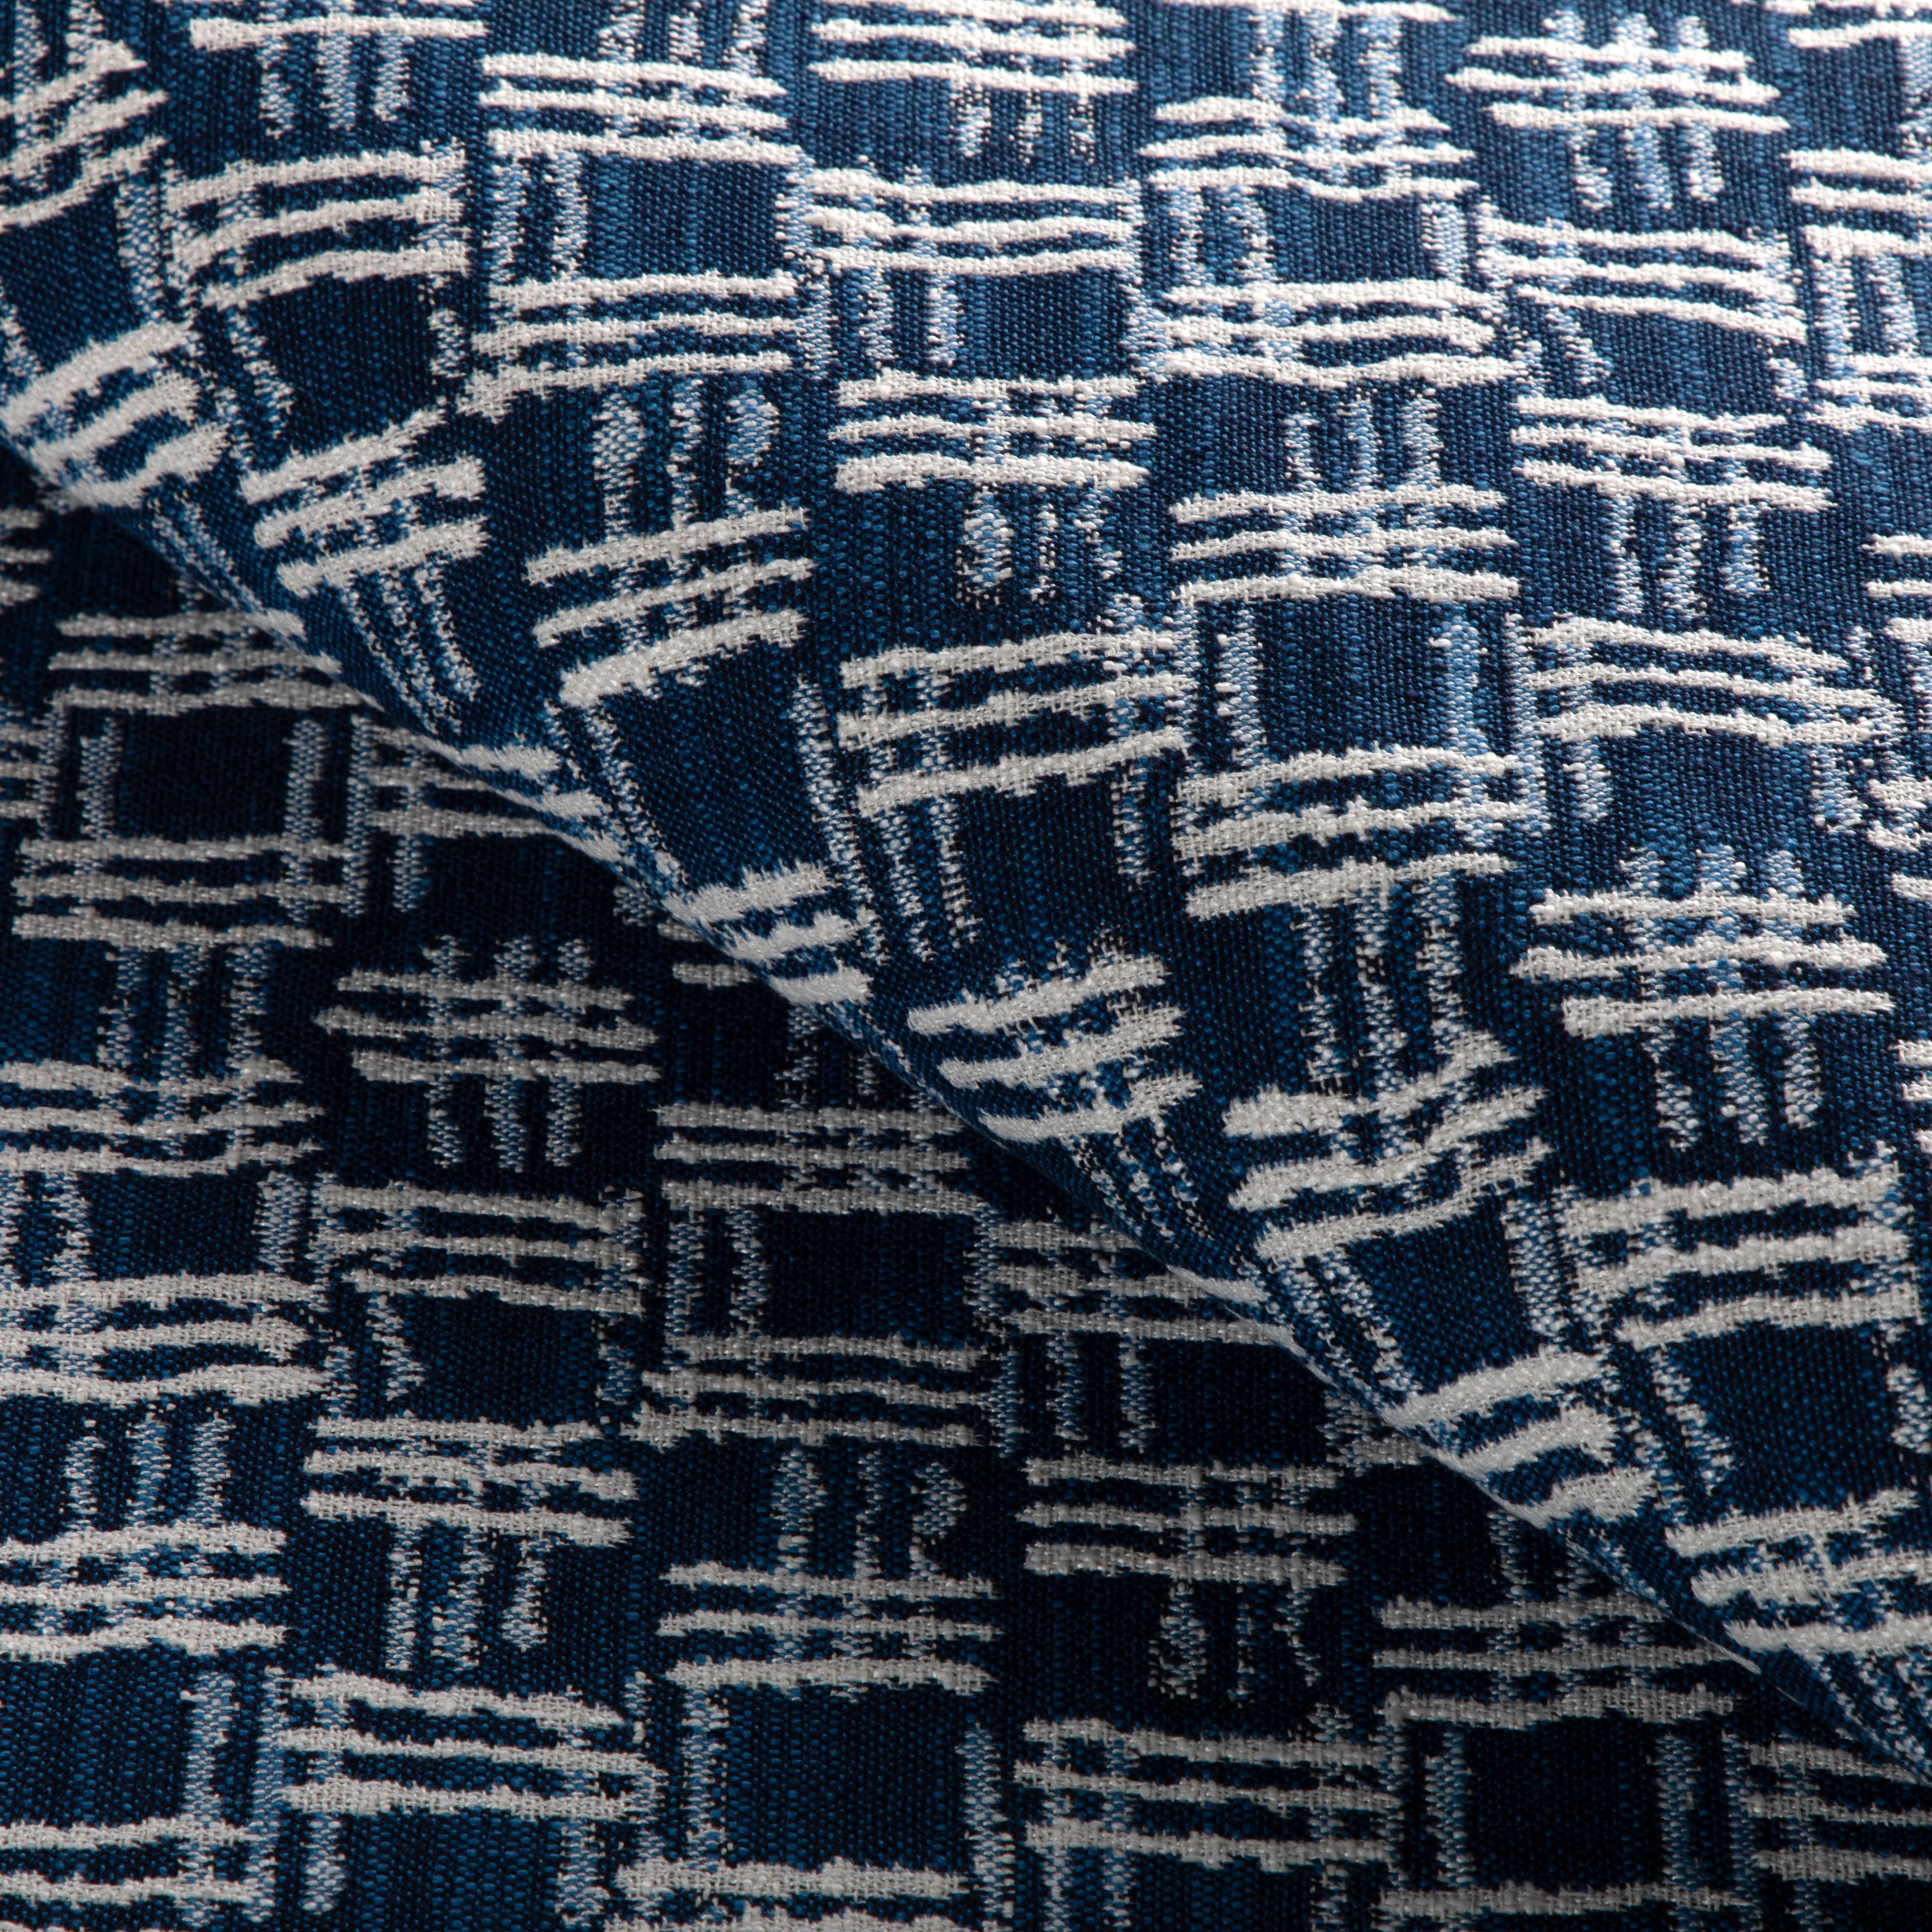 Fabric sample of Cross Waves fabric in marine color - pattern 36928.51.0 - by Kravet Couture in the Riviera collection